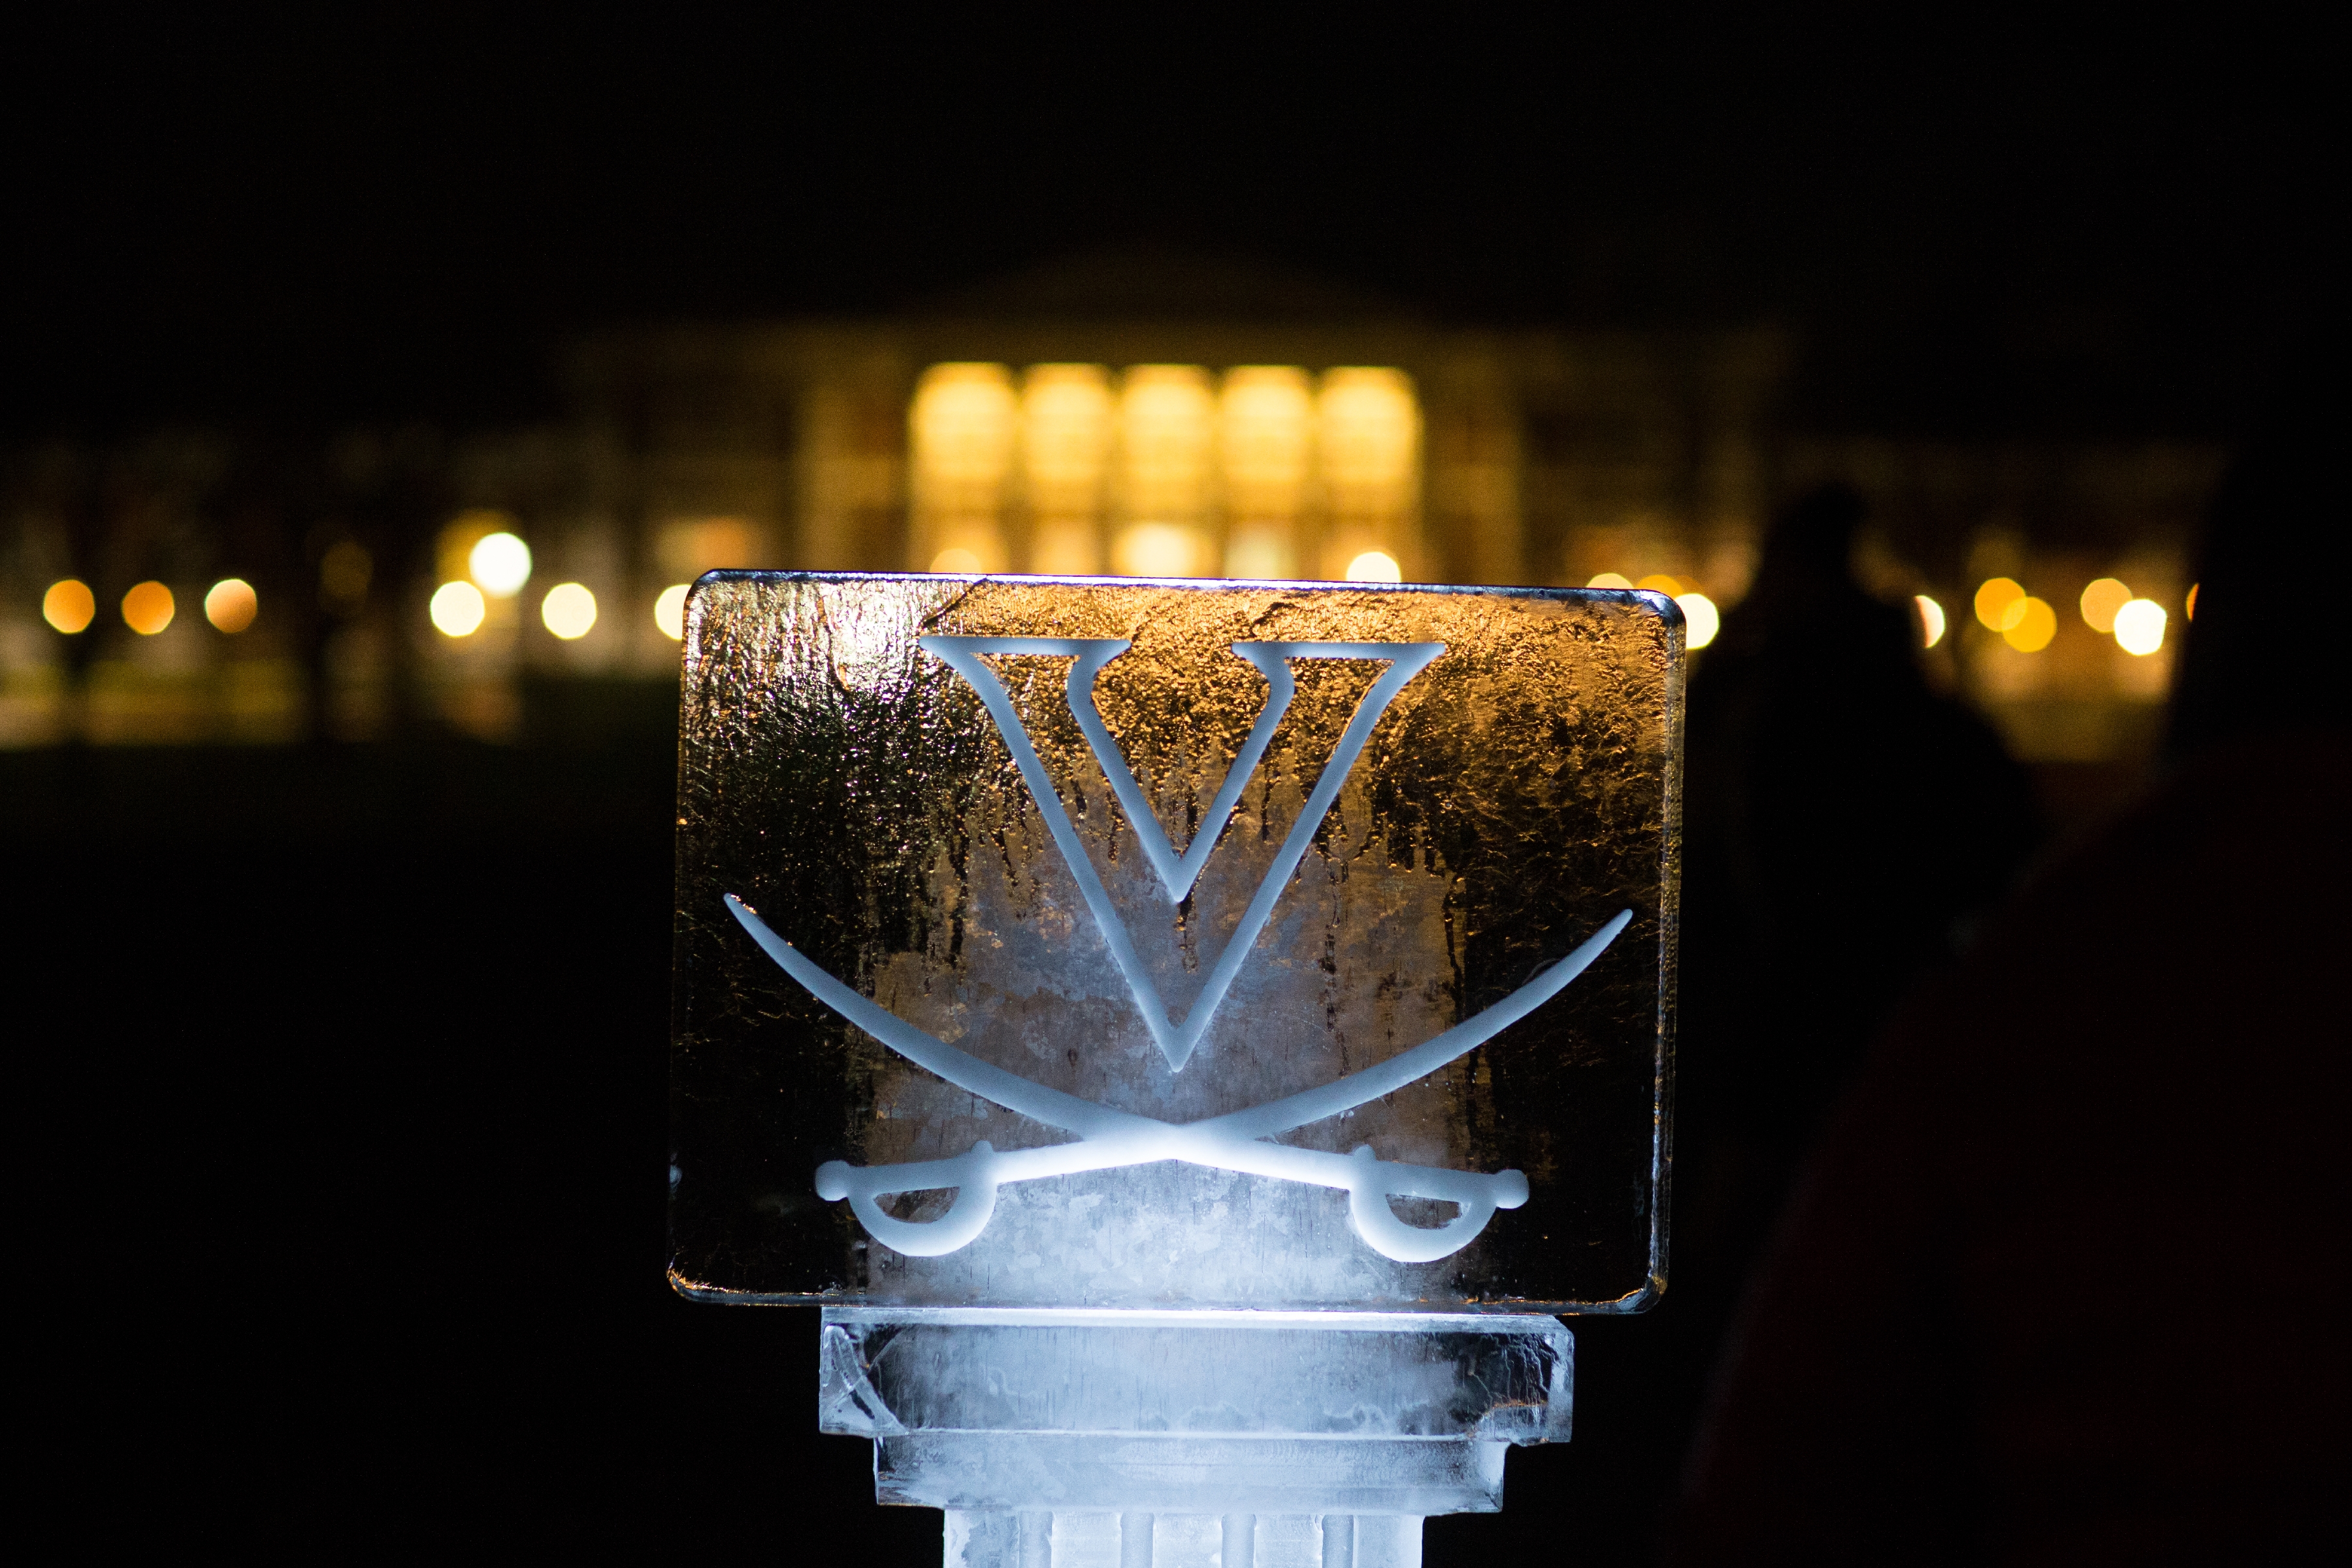 The festivities include plenty of food, drinks – and even ice sculptures.